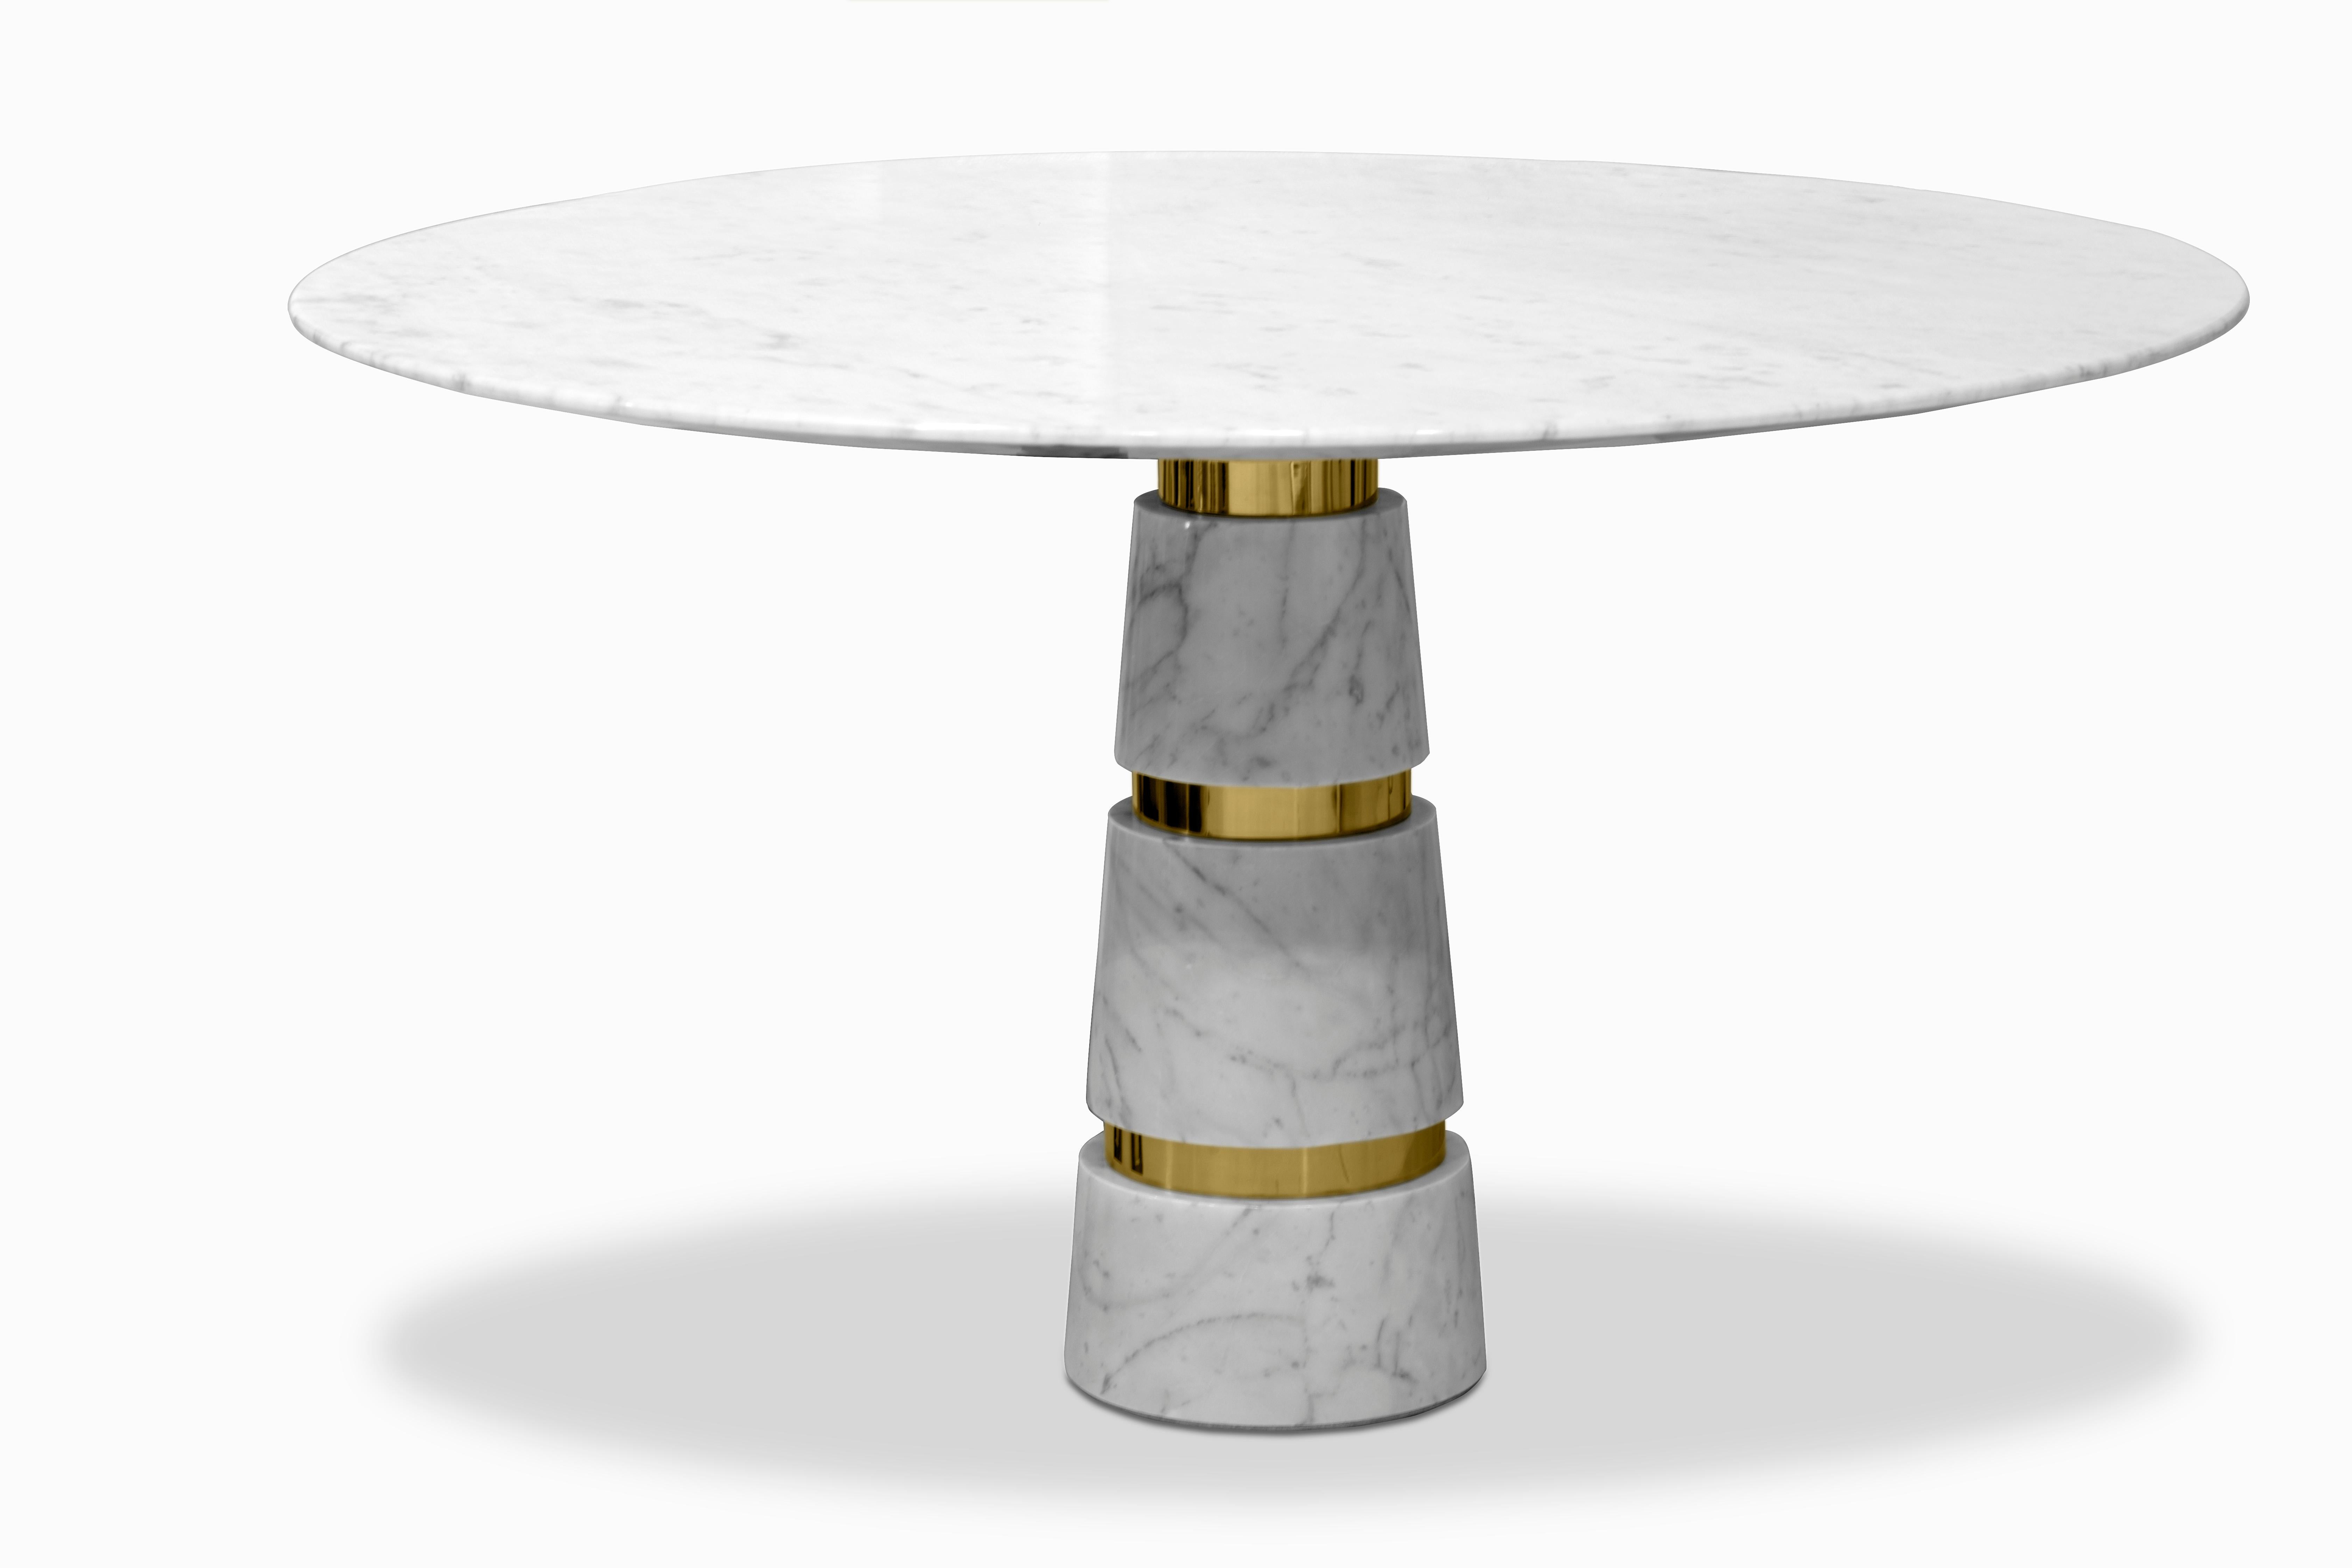 Minimalistic design and minute details, like the glamorous silver bands on the Avalanche leg, bring the Avalanche Dining Table speeding into the future. The broad white marble tabletop reminds you of your life of luxury, while the abstract,